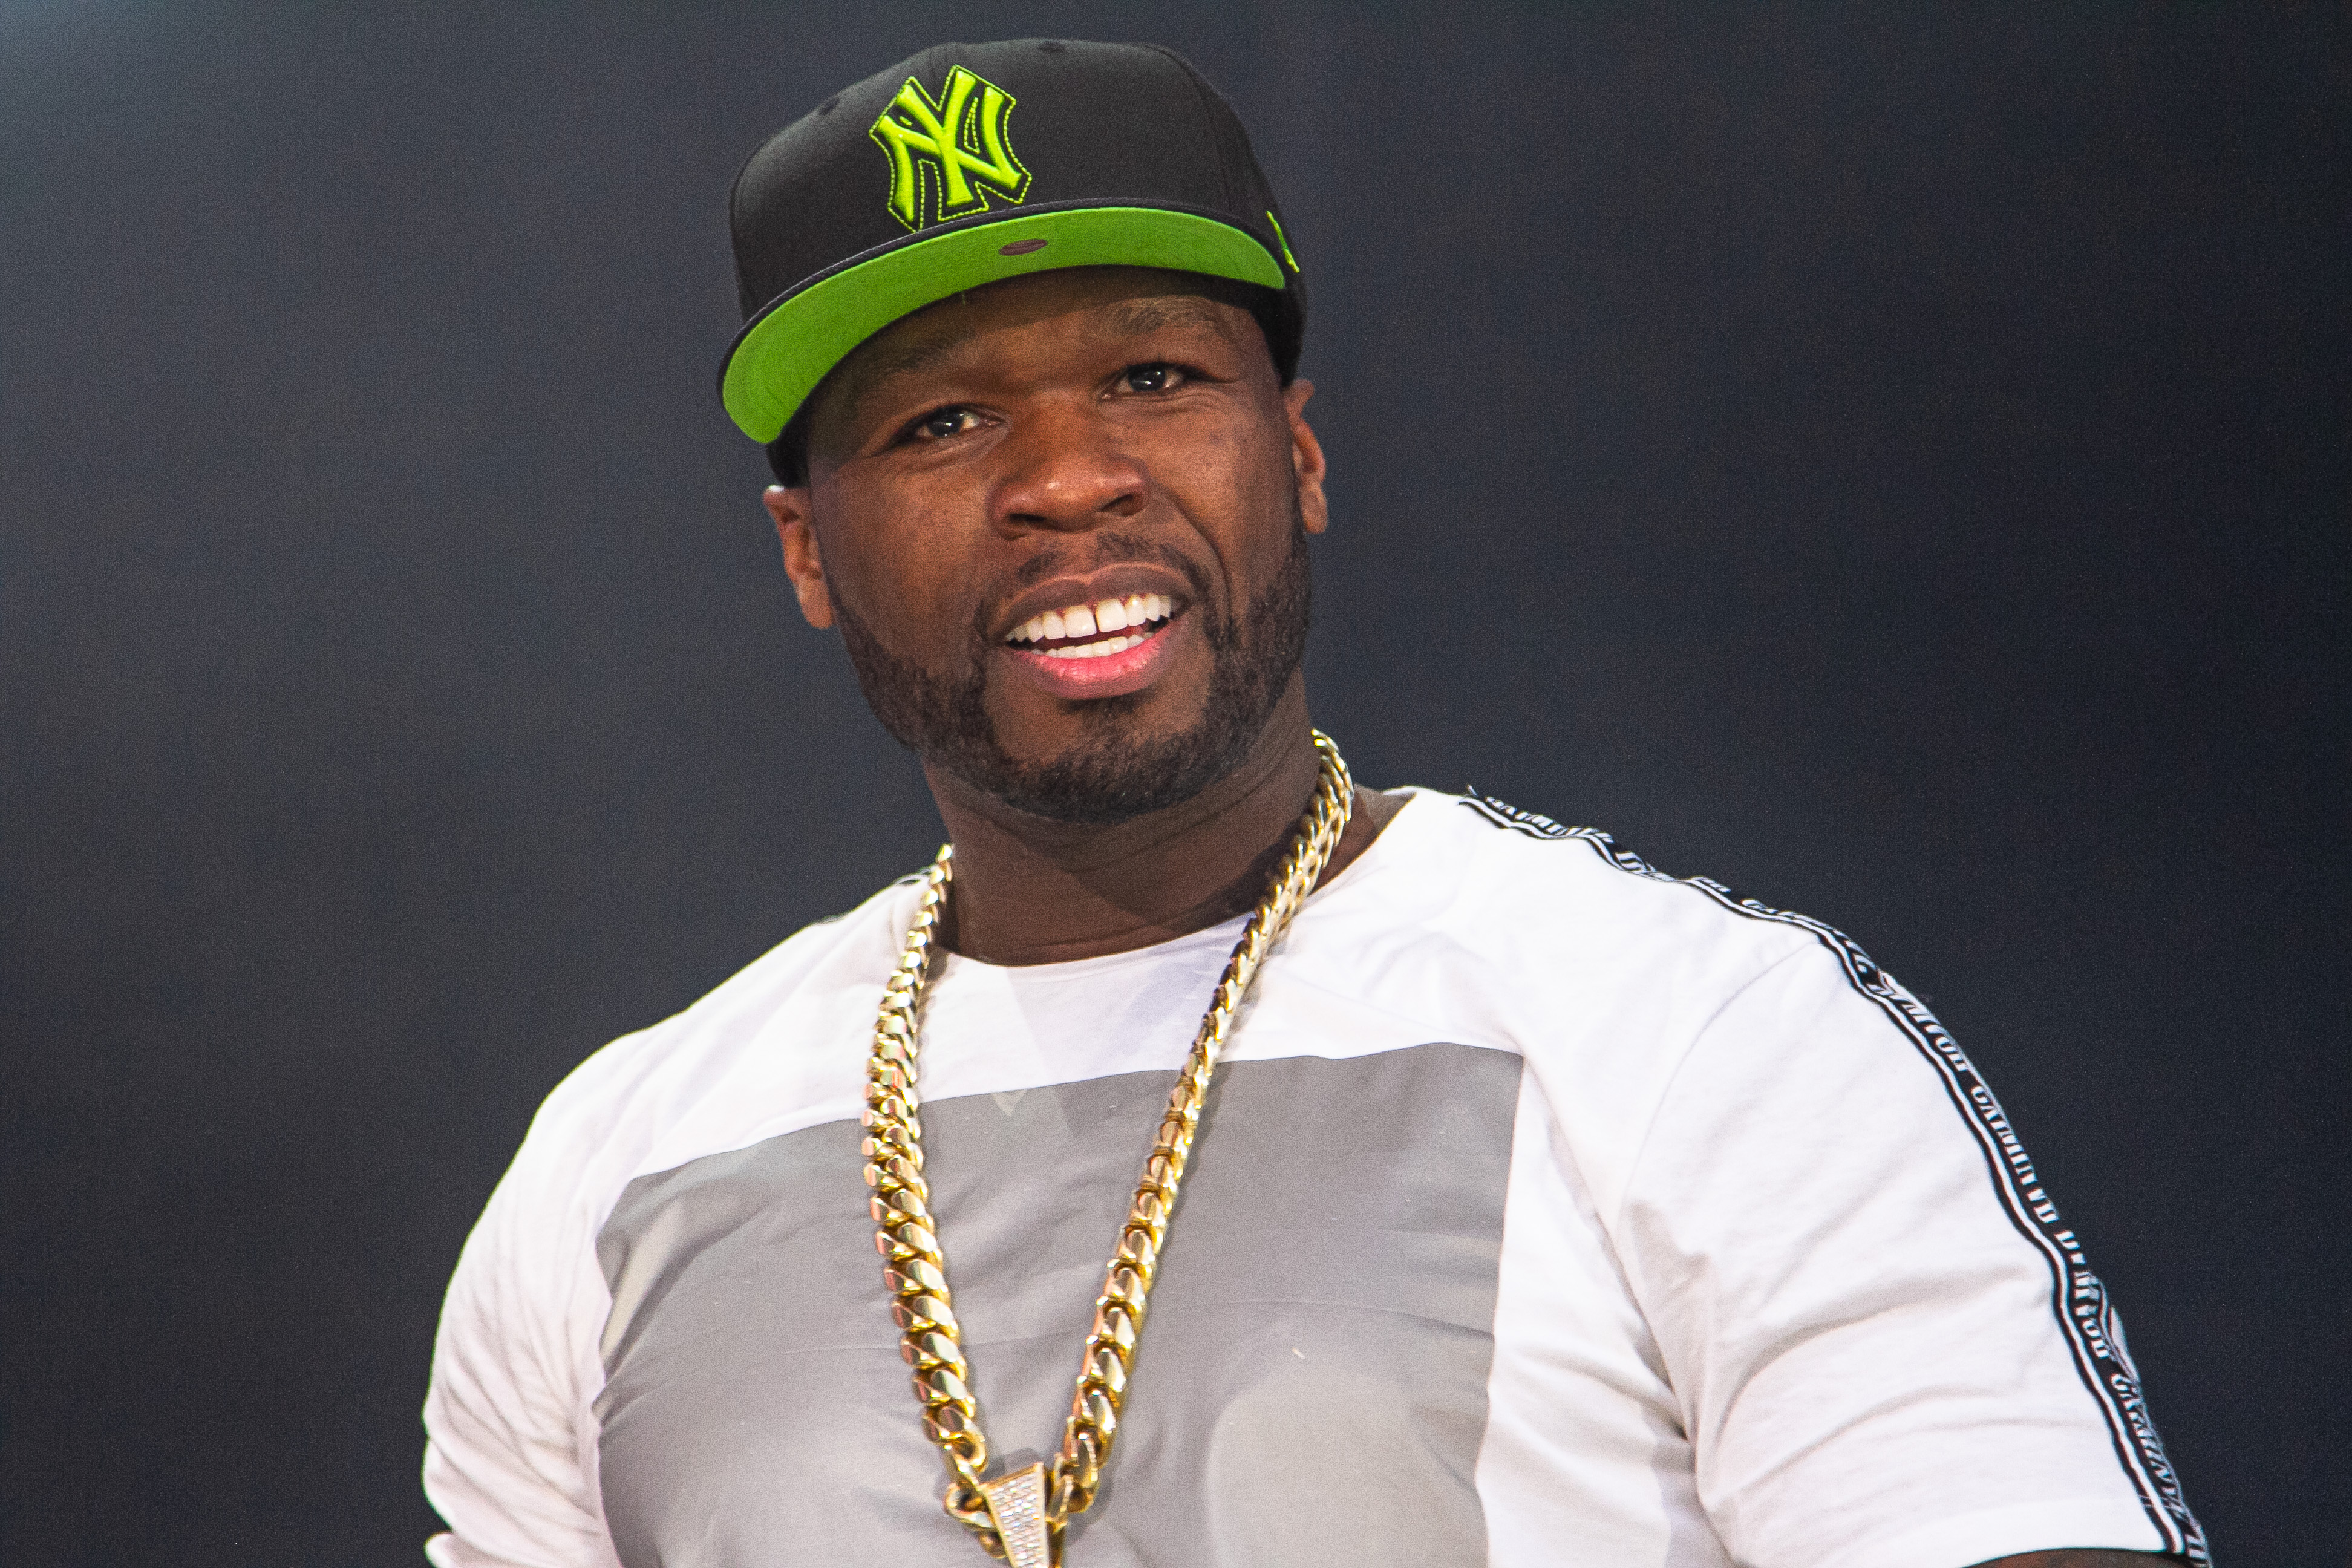 50 Cent X Account Hacked & Used In Crypto Scam